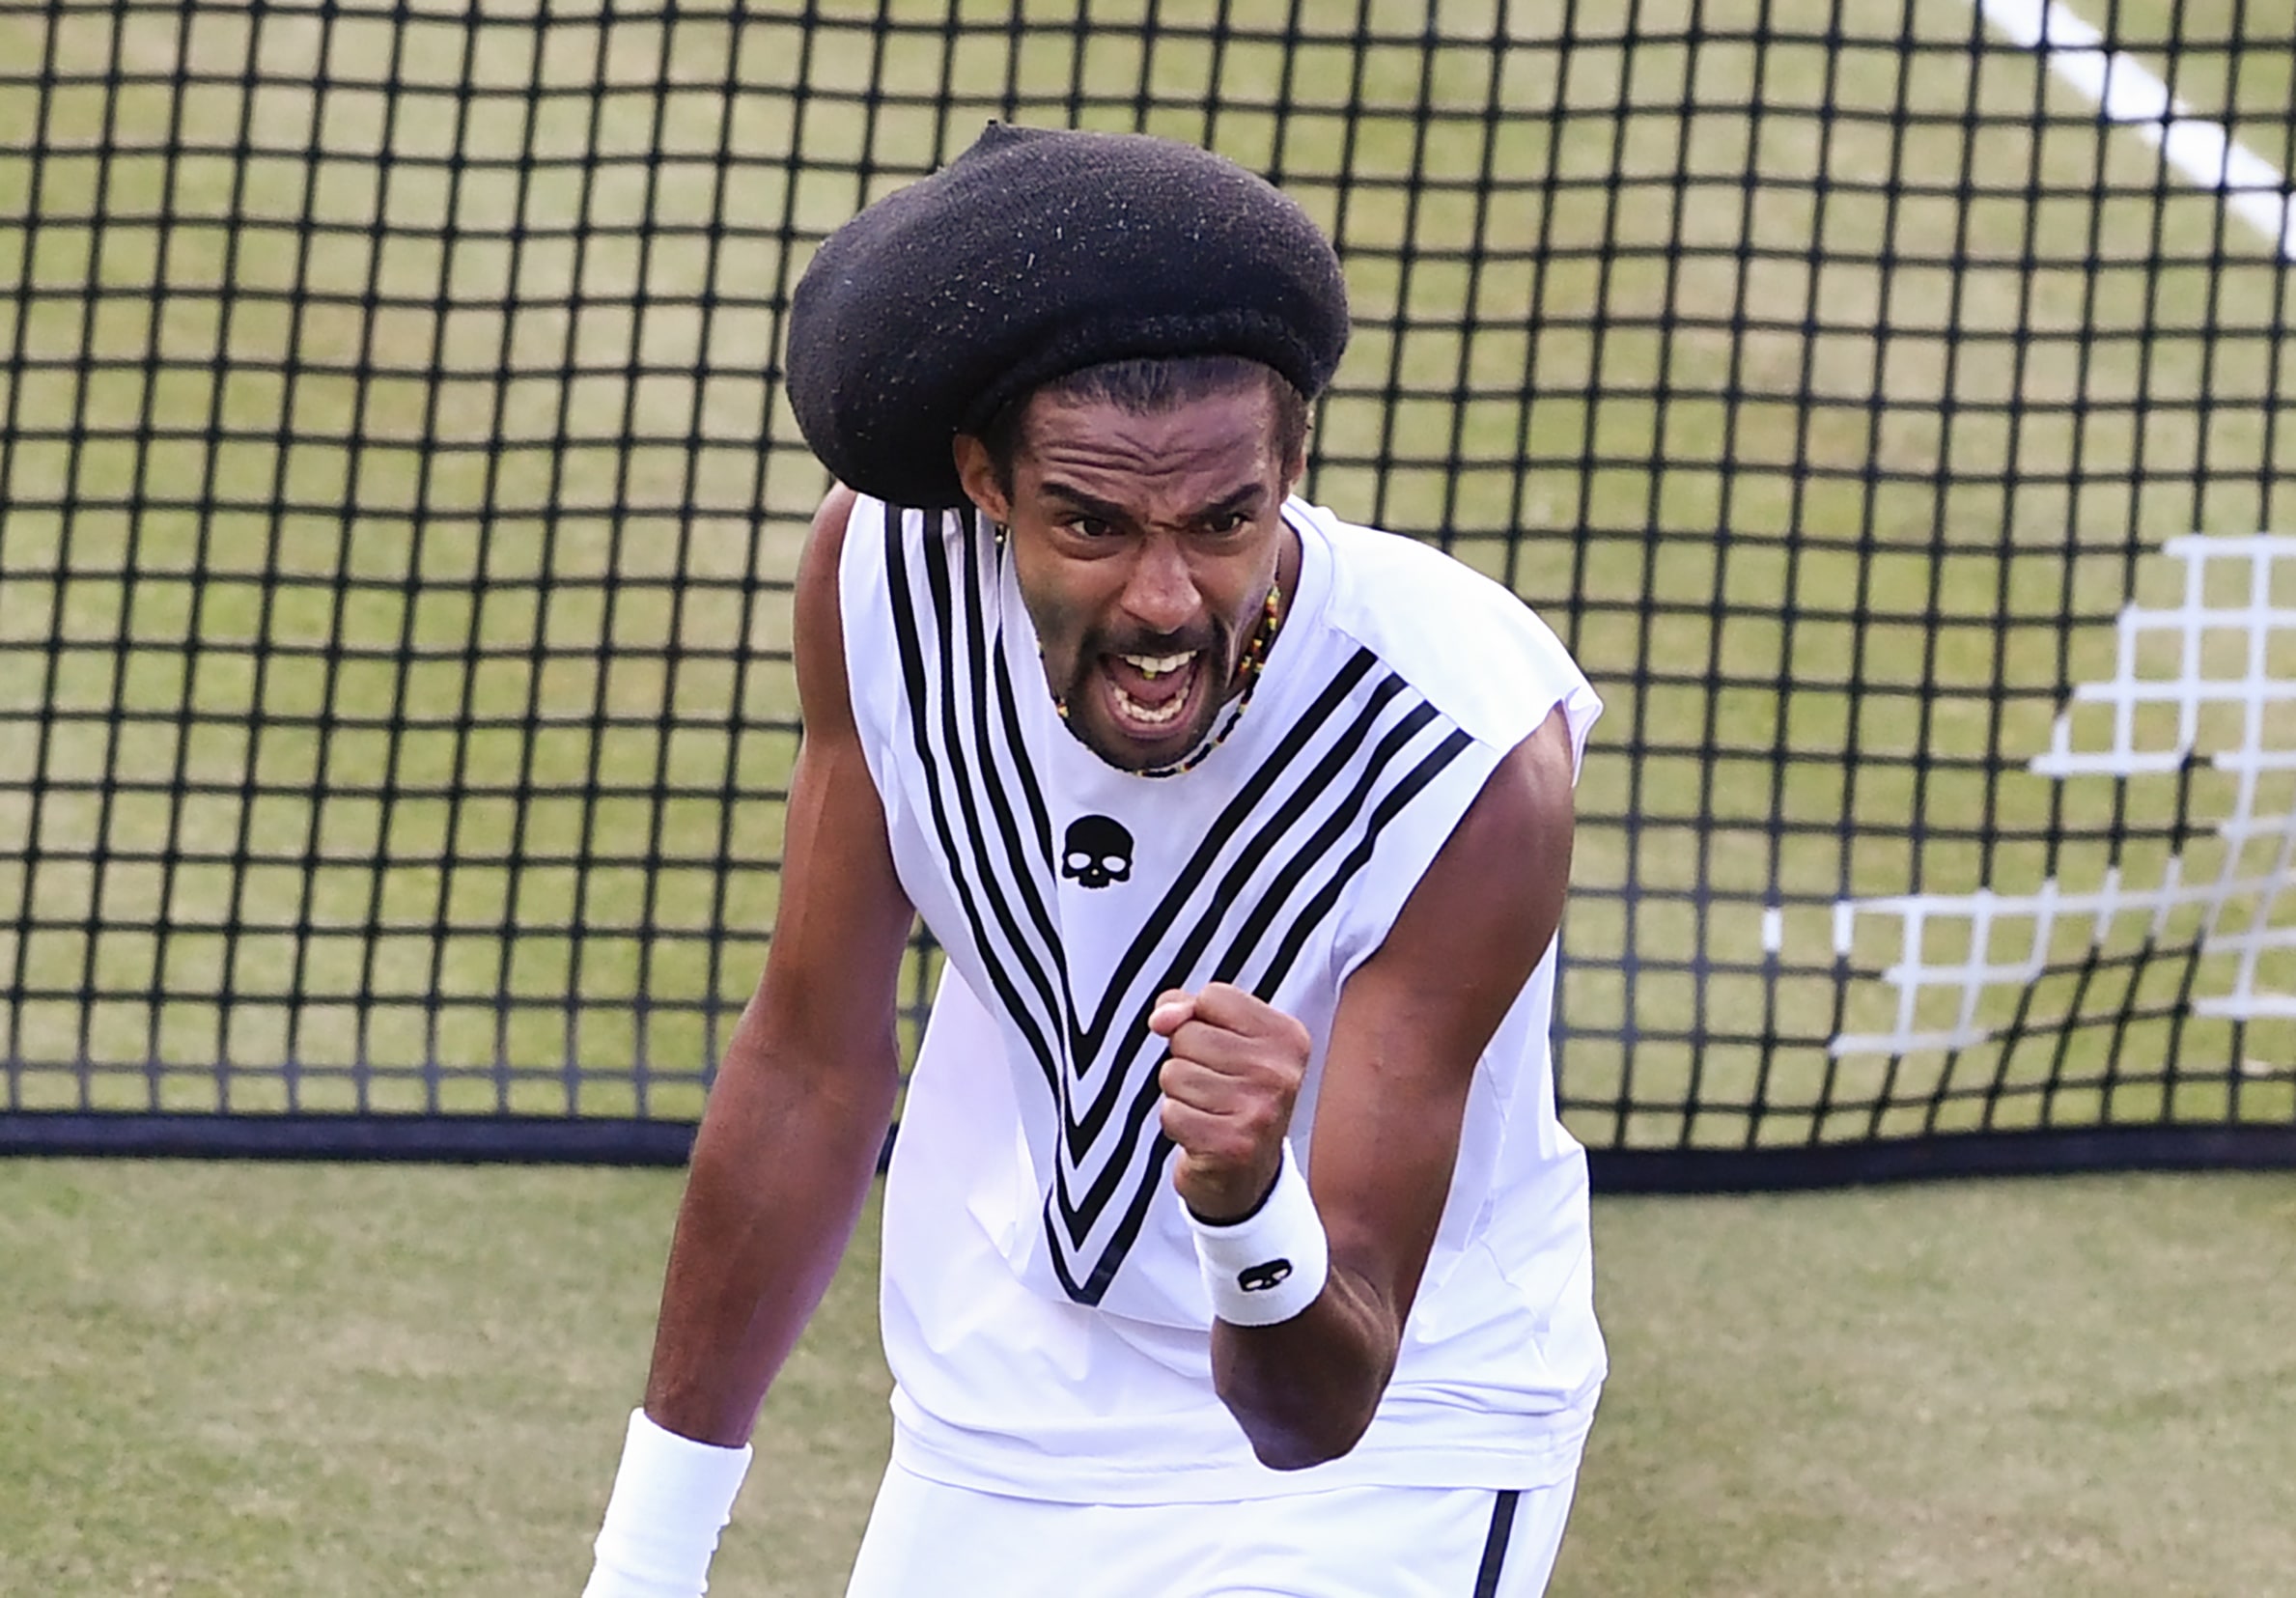 10 Things To Know About Dustin Brown Headliner Of Tennis Point Series